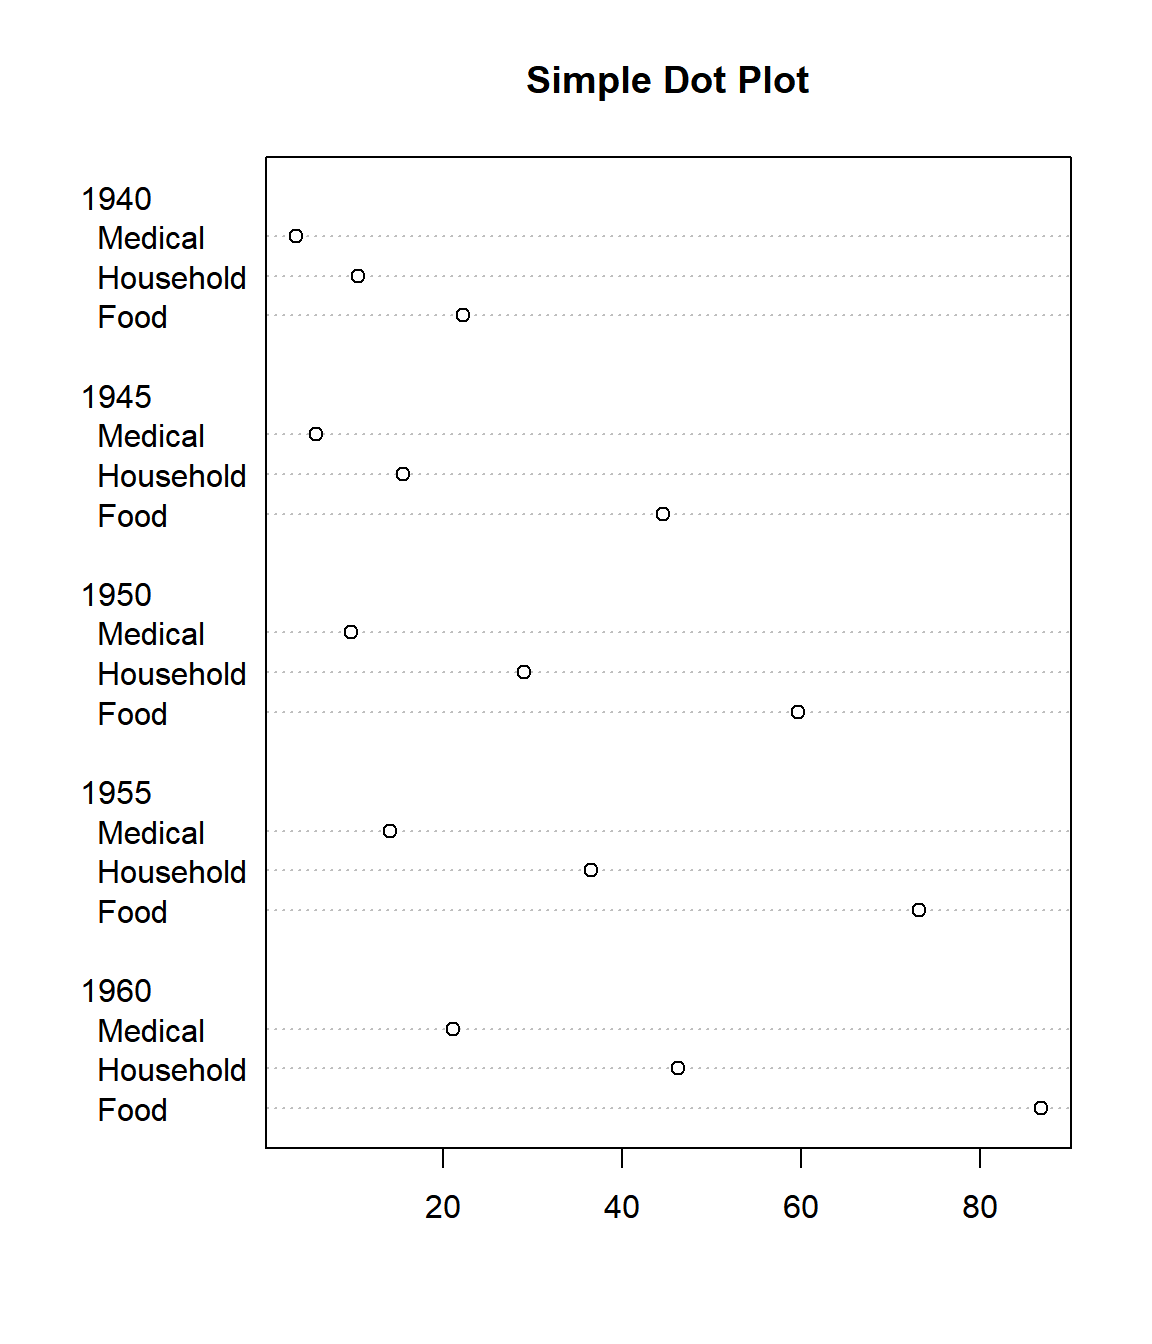 Example 2: Simple Dot Plot in R